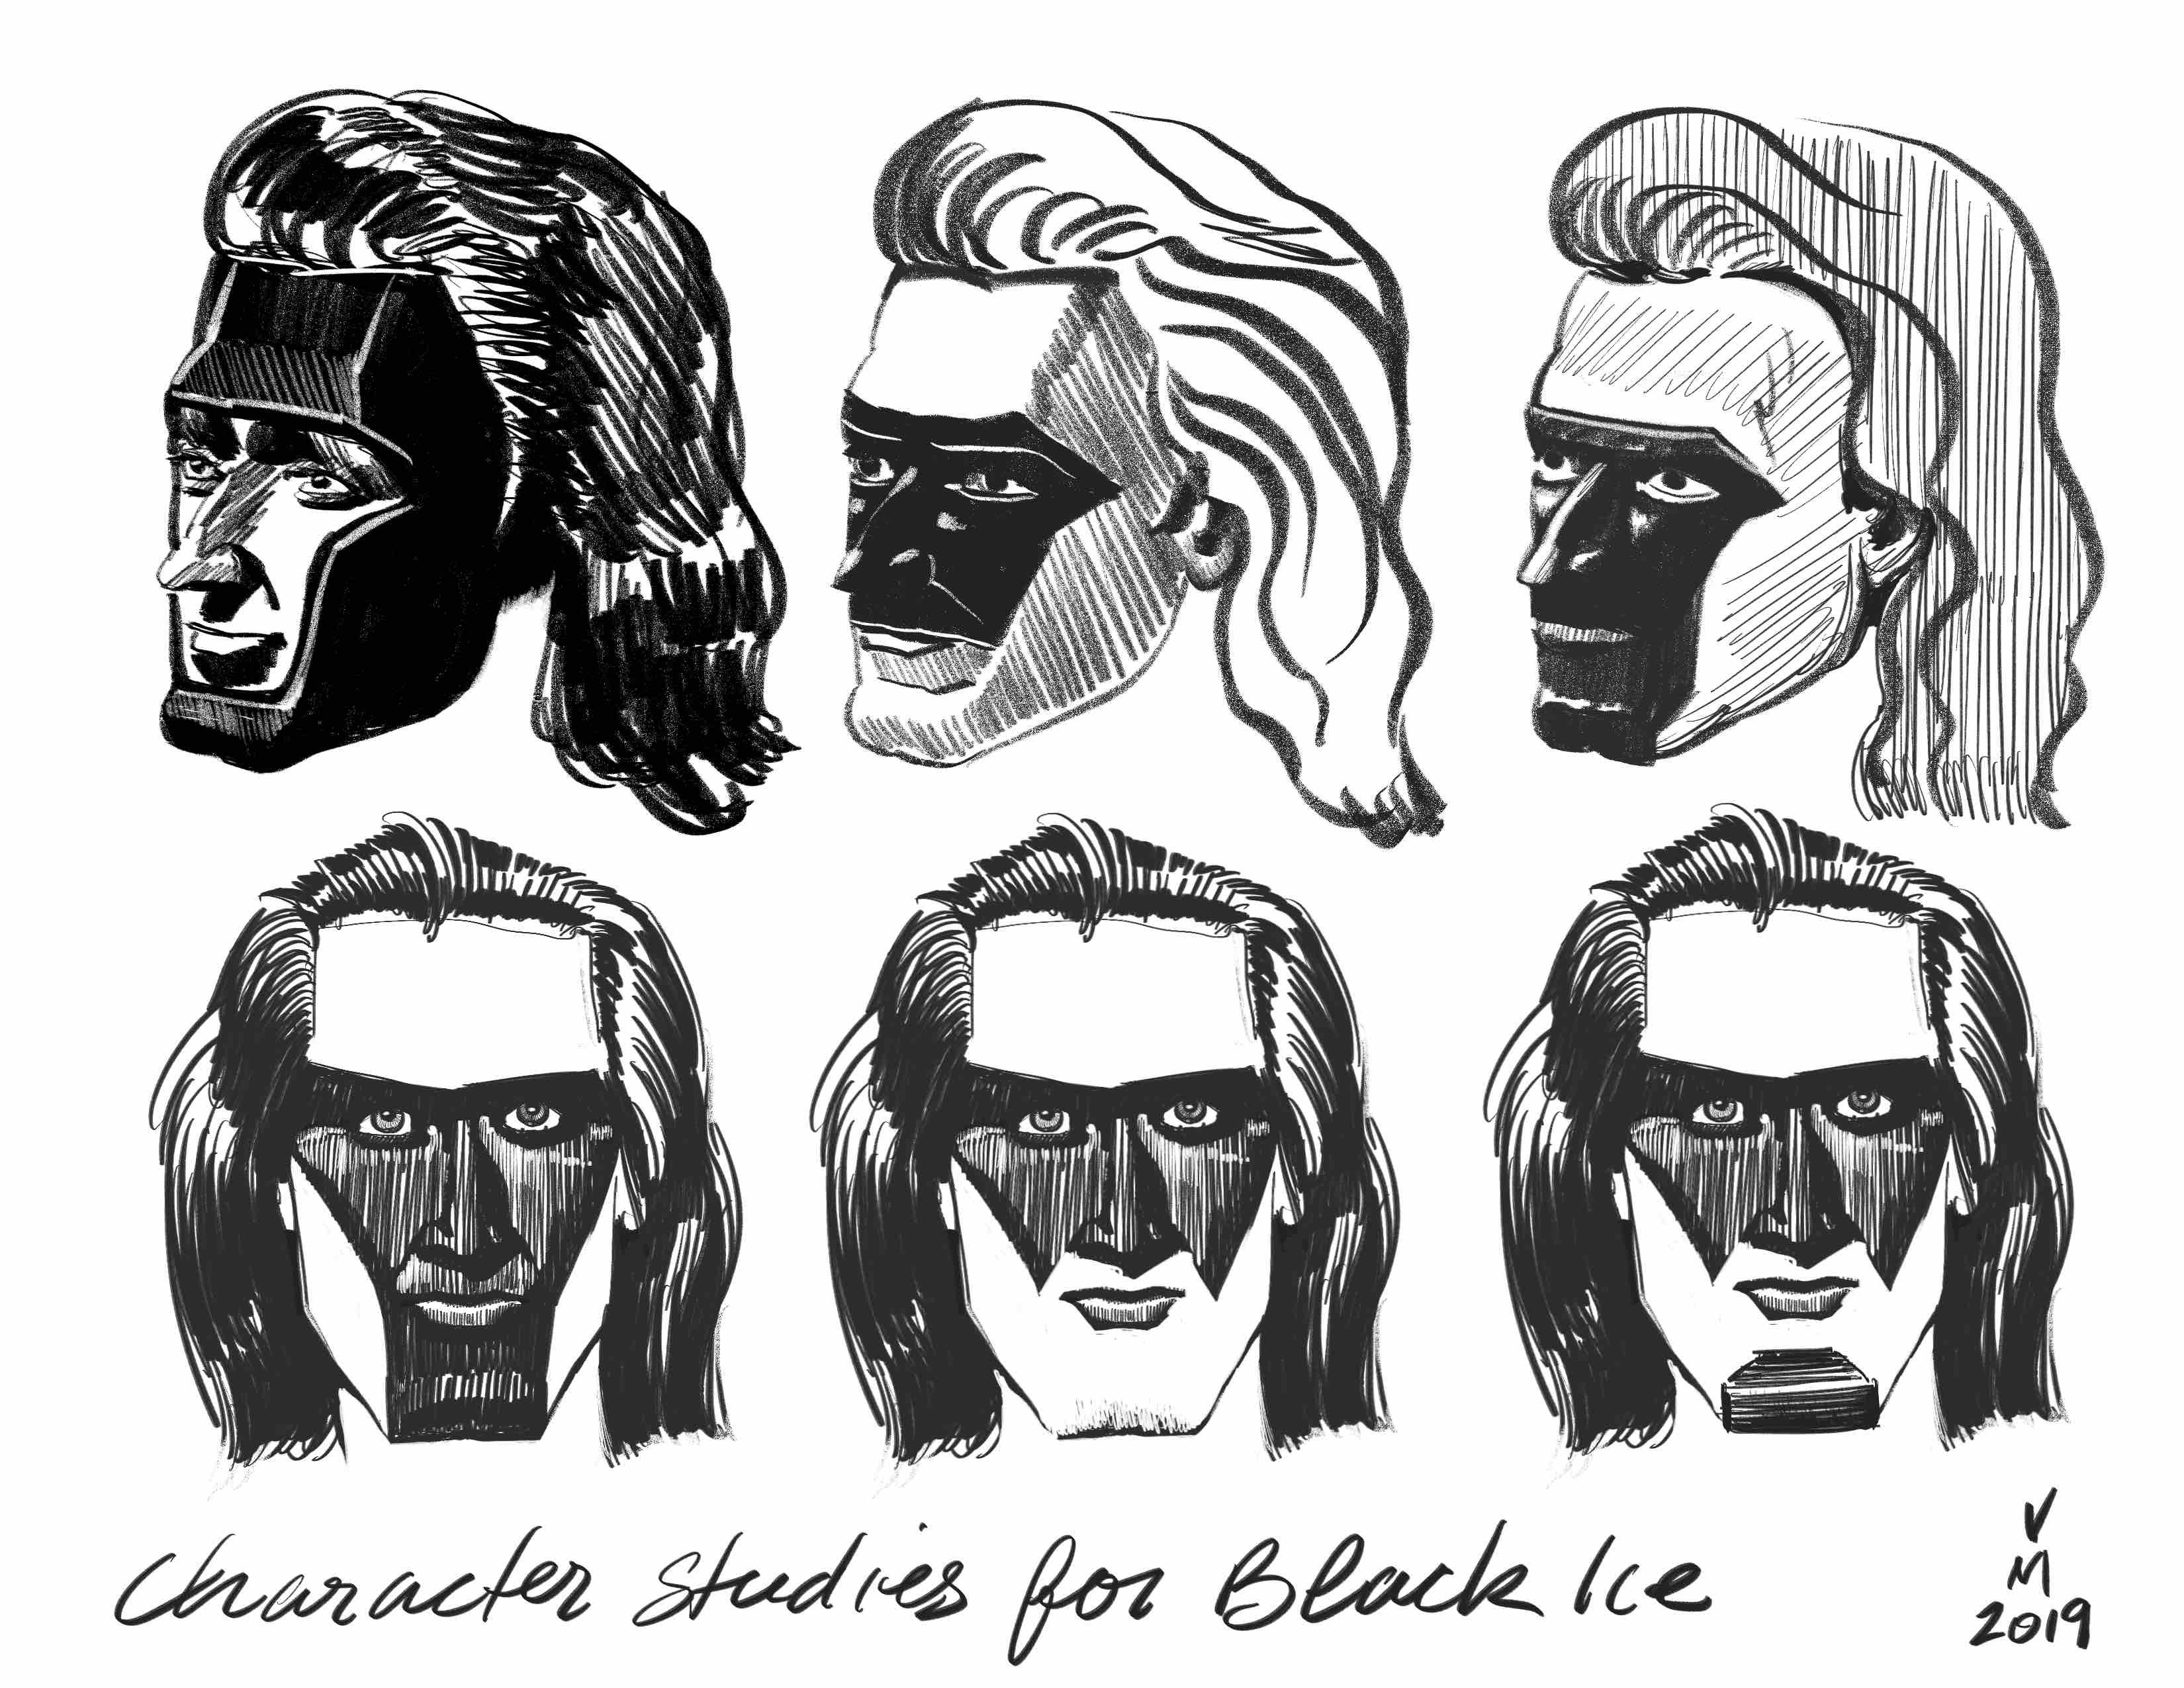 Character studies for black ice.